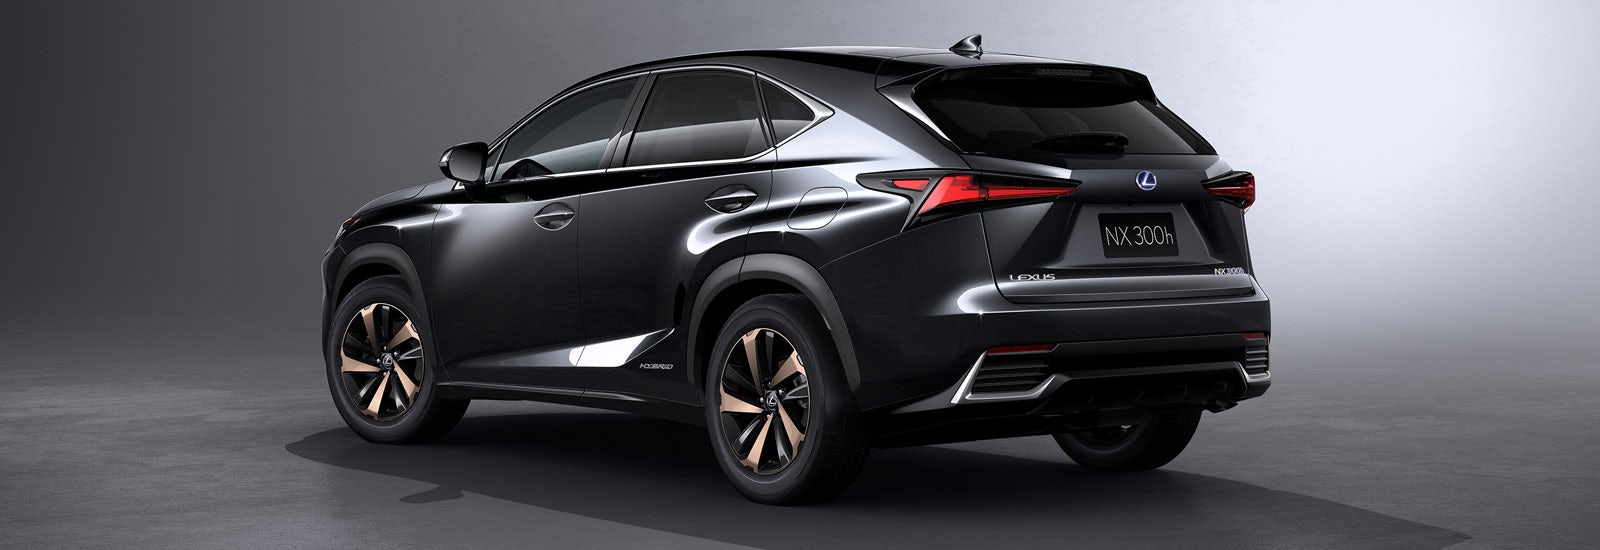 18 Lexus Nx Facelift Price Specs And Release Date Carwow